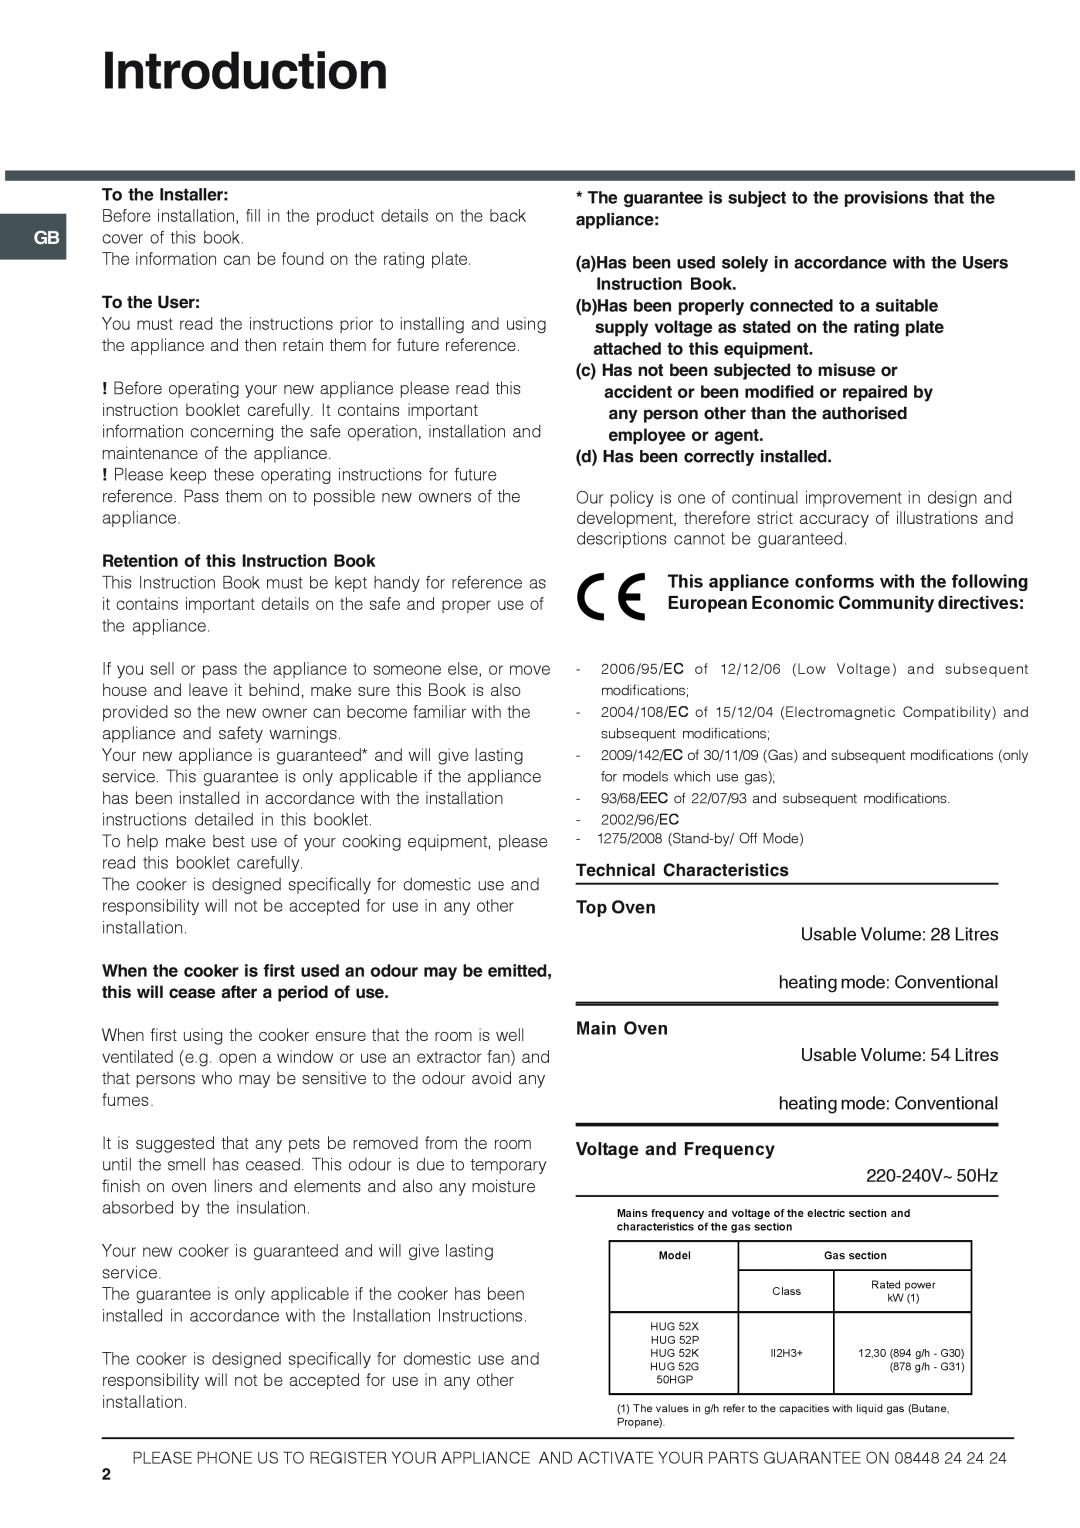 Hotpoint HUG 52K, HUG 52P, 50HGP Introduction, To the Installer, To the User, Retention of this Instruction Book, Main Oven 